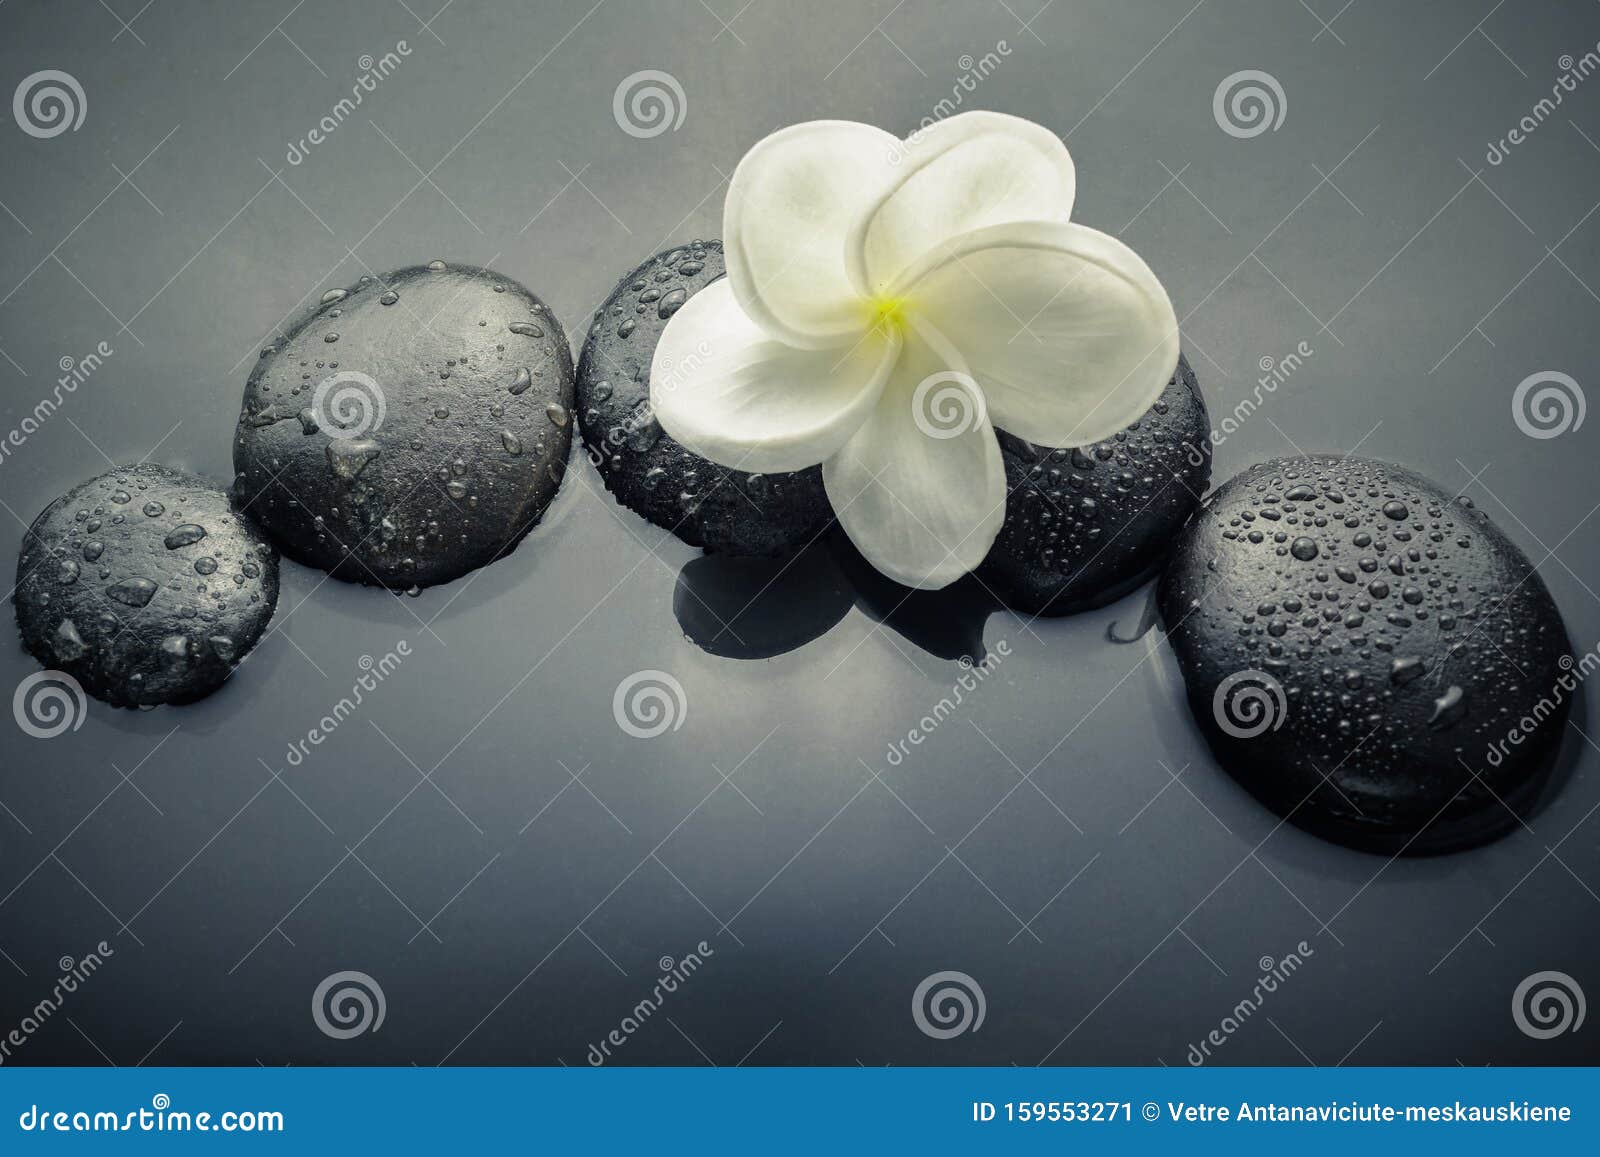 shiny zen stones with water drops and plumeria flower. top view